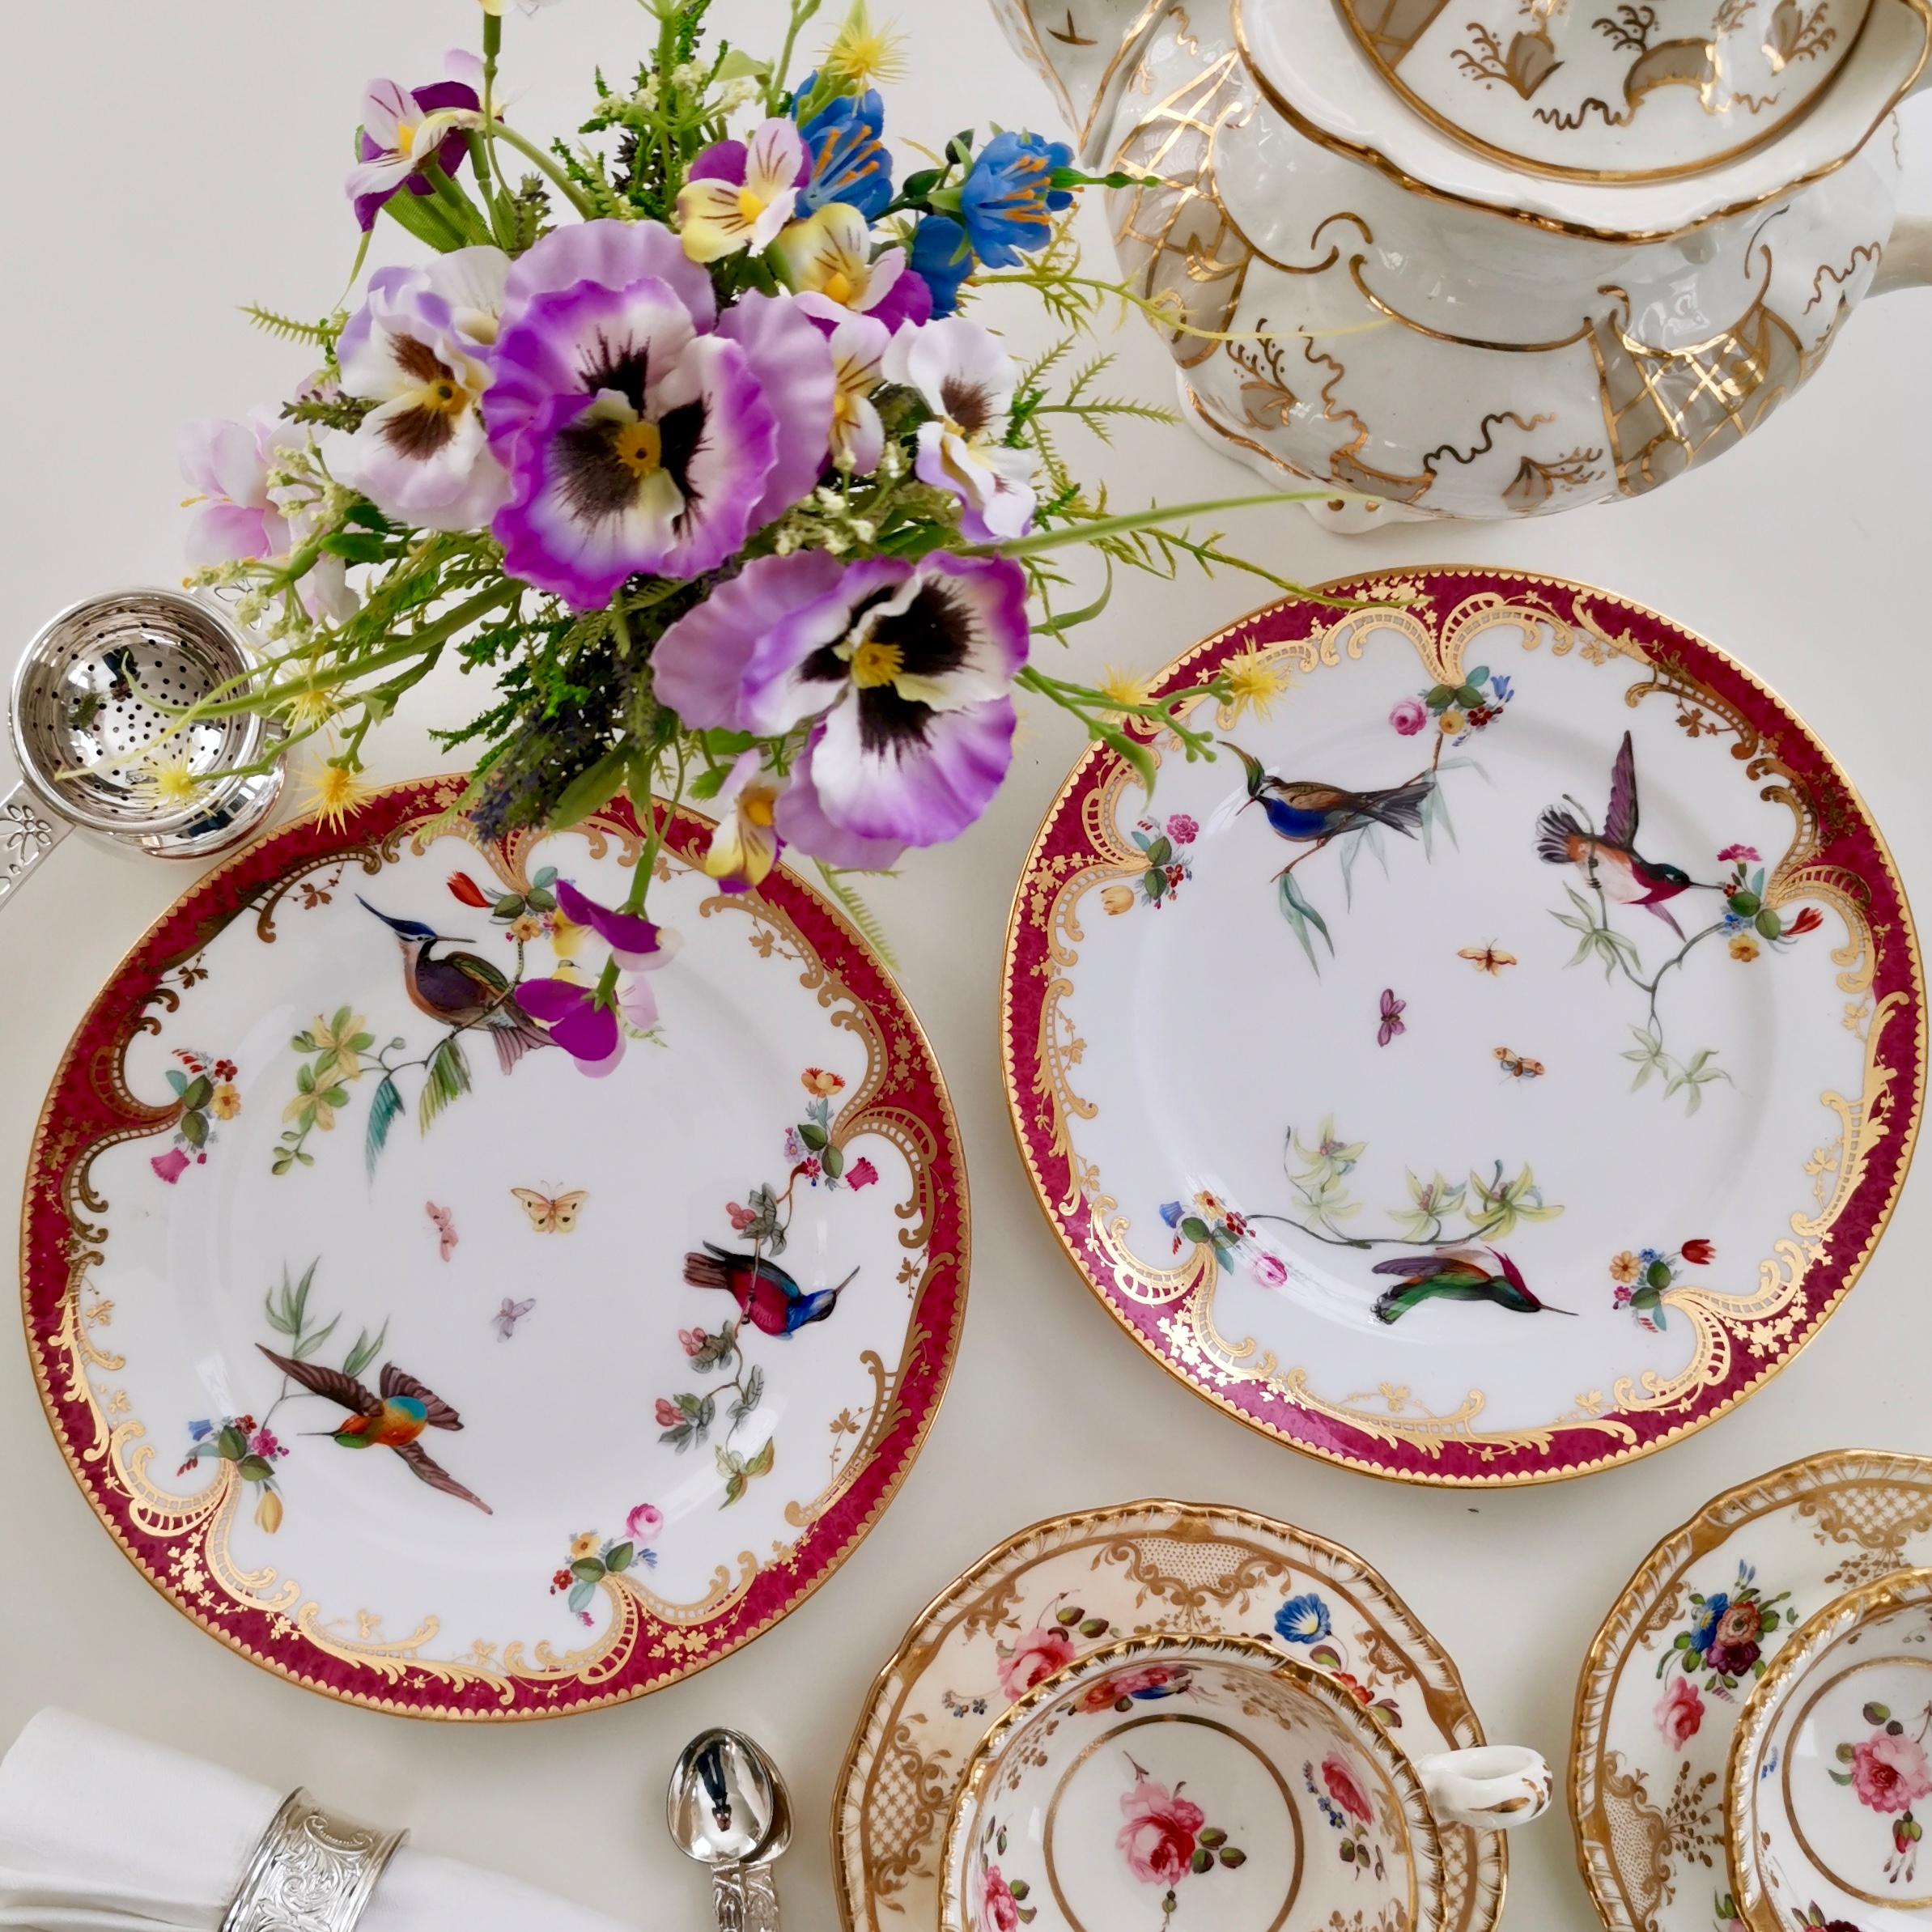 This is a set of 2 small plates made by Coalport in circa 1865. The plates are hand painted with beautiful humming birds and butterflies by the famous porcelain artist John Randall.

I am also able to get two plates from the same set with parrots,